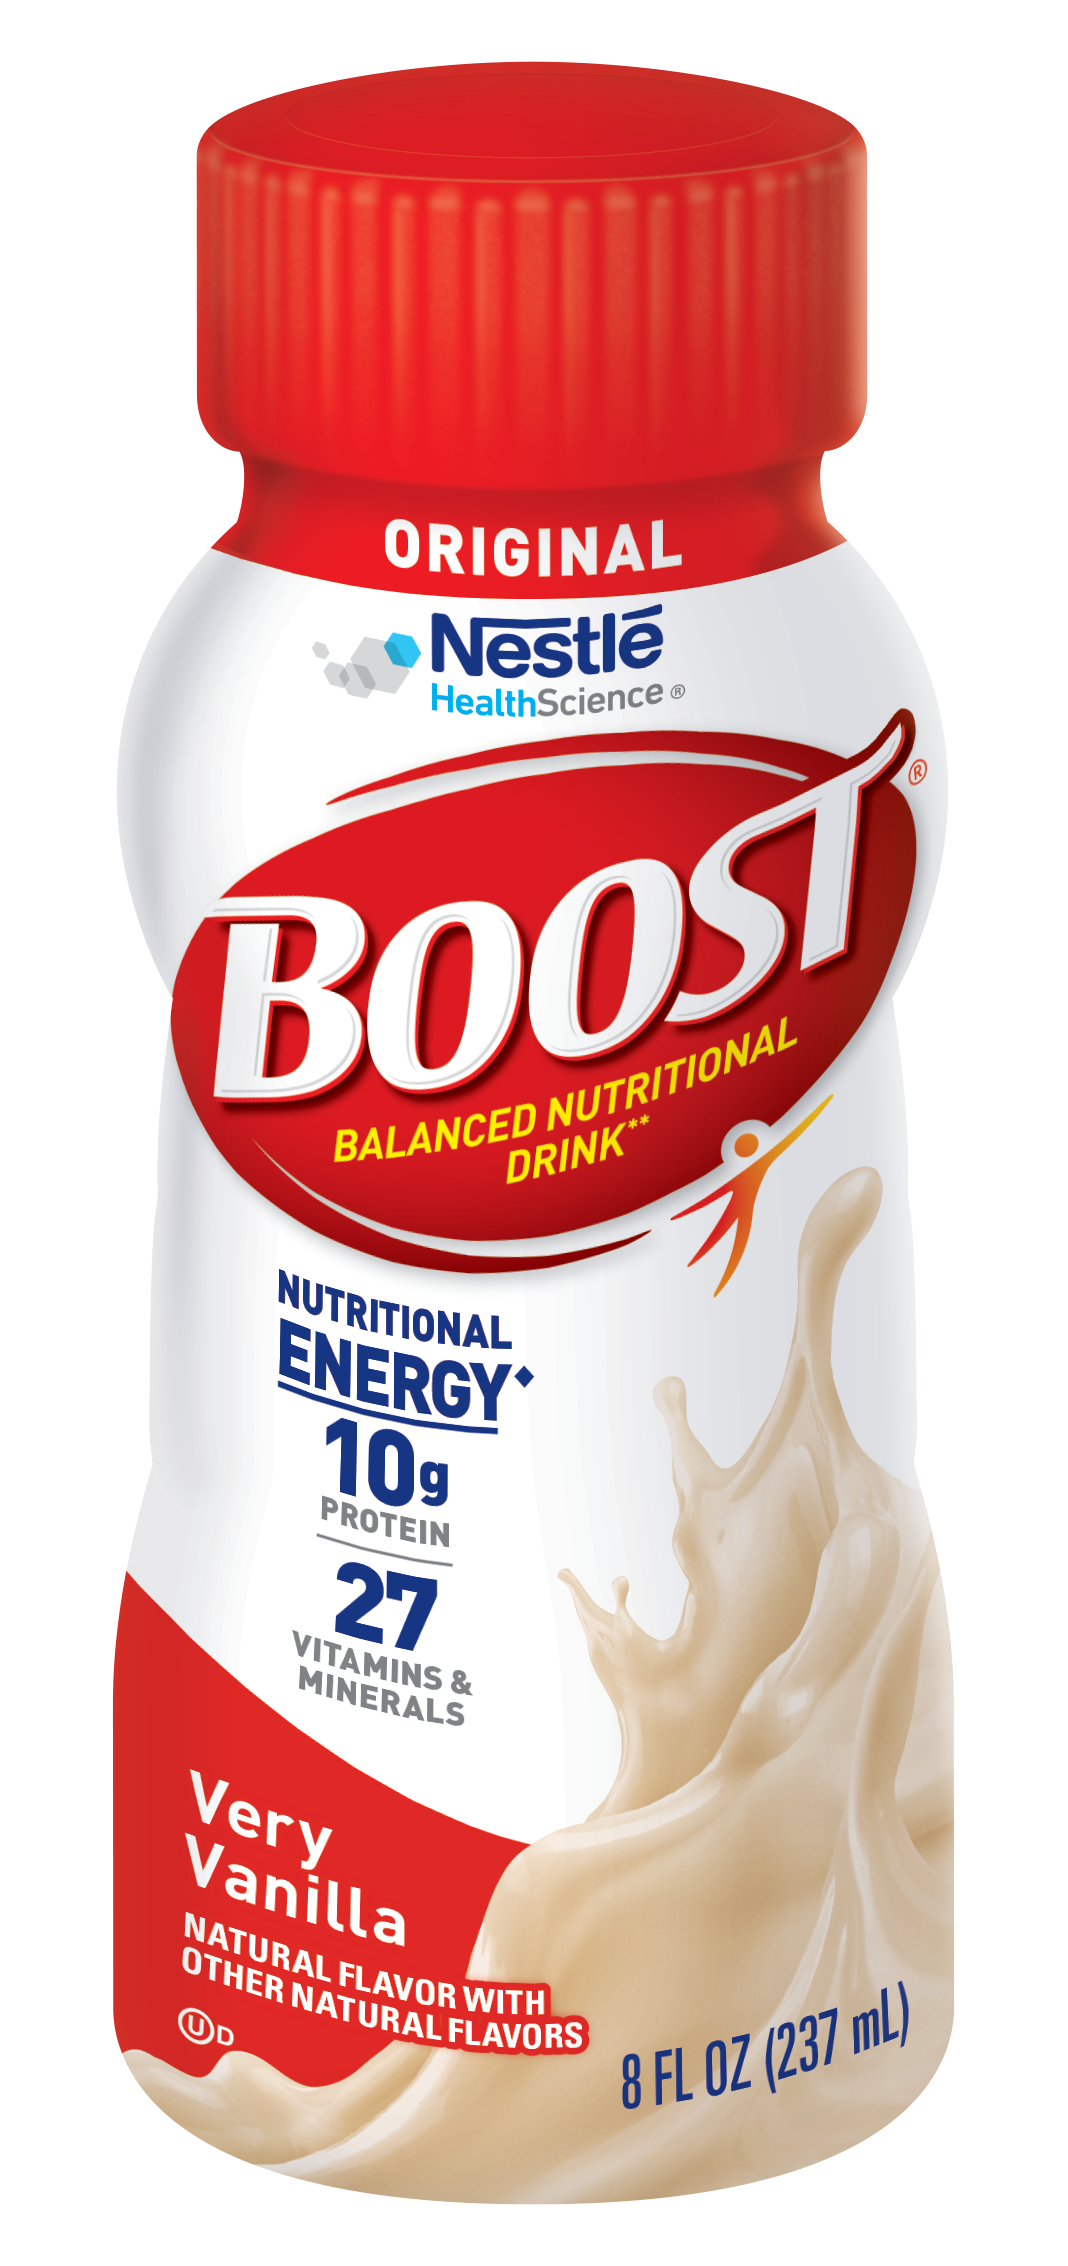 What is NOW Boost?